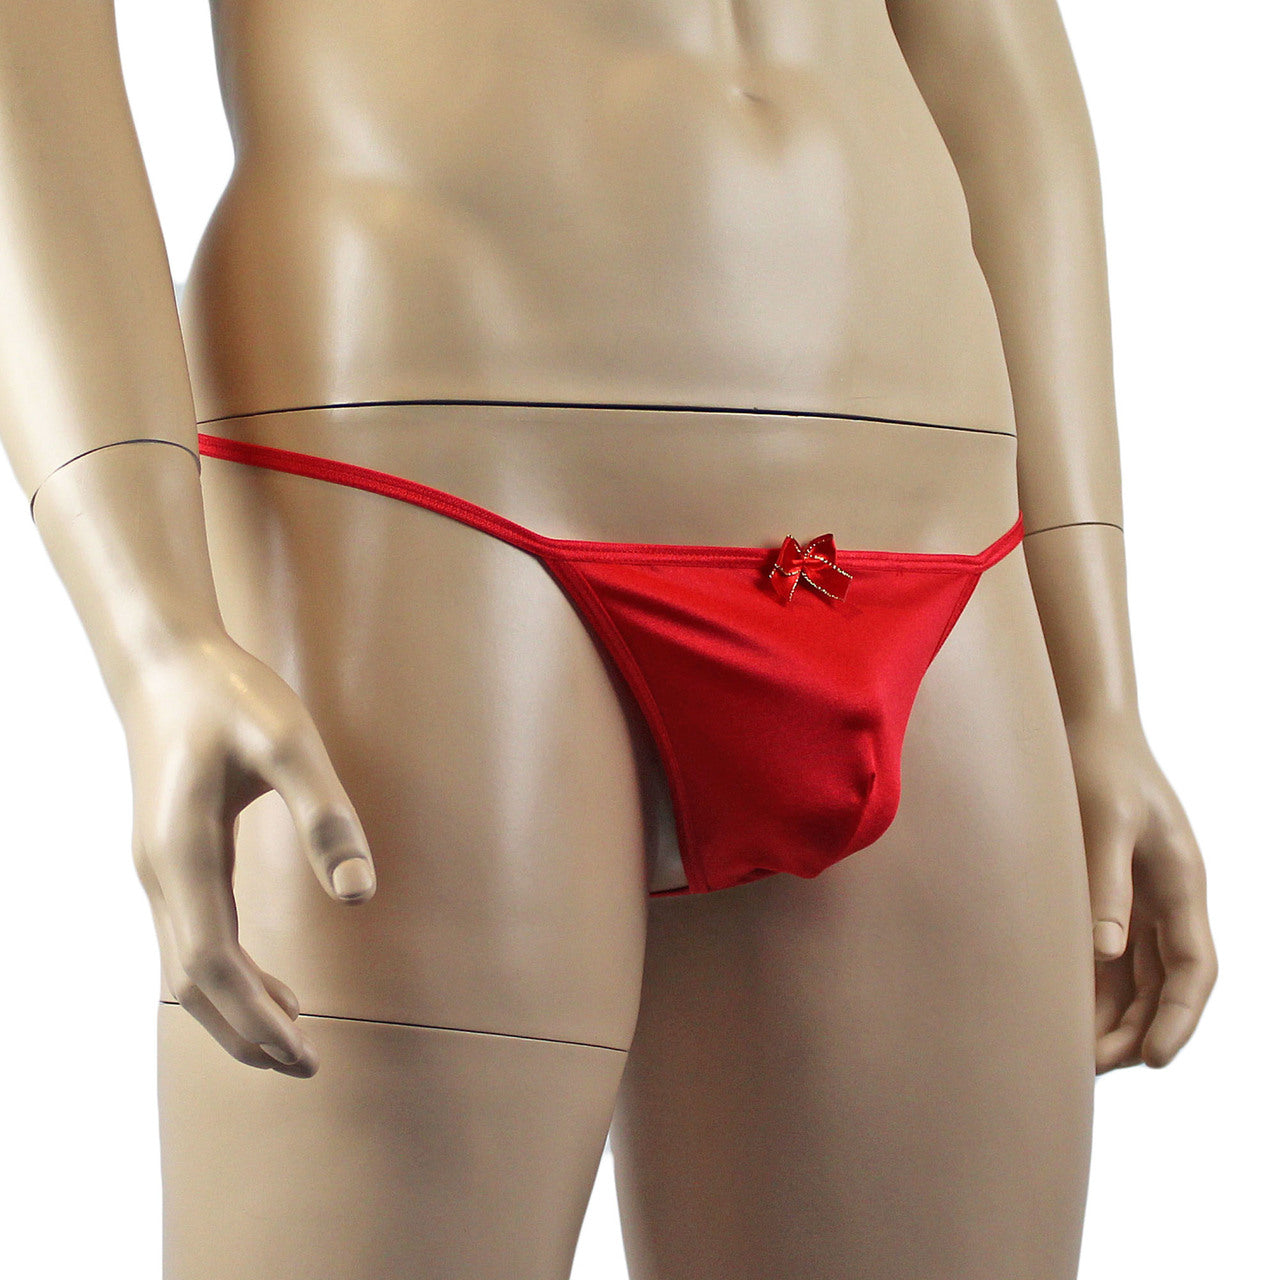 Mens Stretch Spandex Pouch G string with Red & Gold Bow